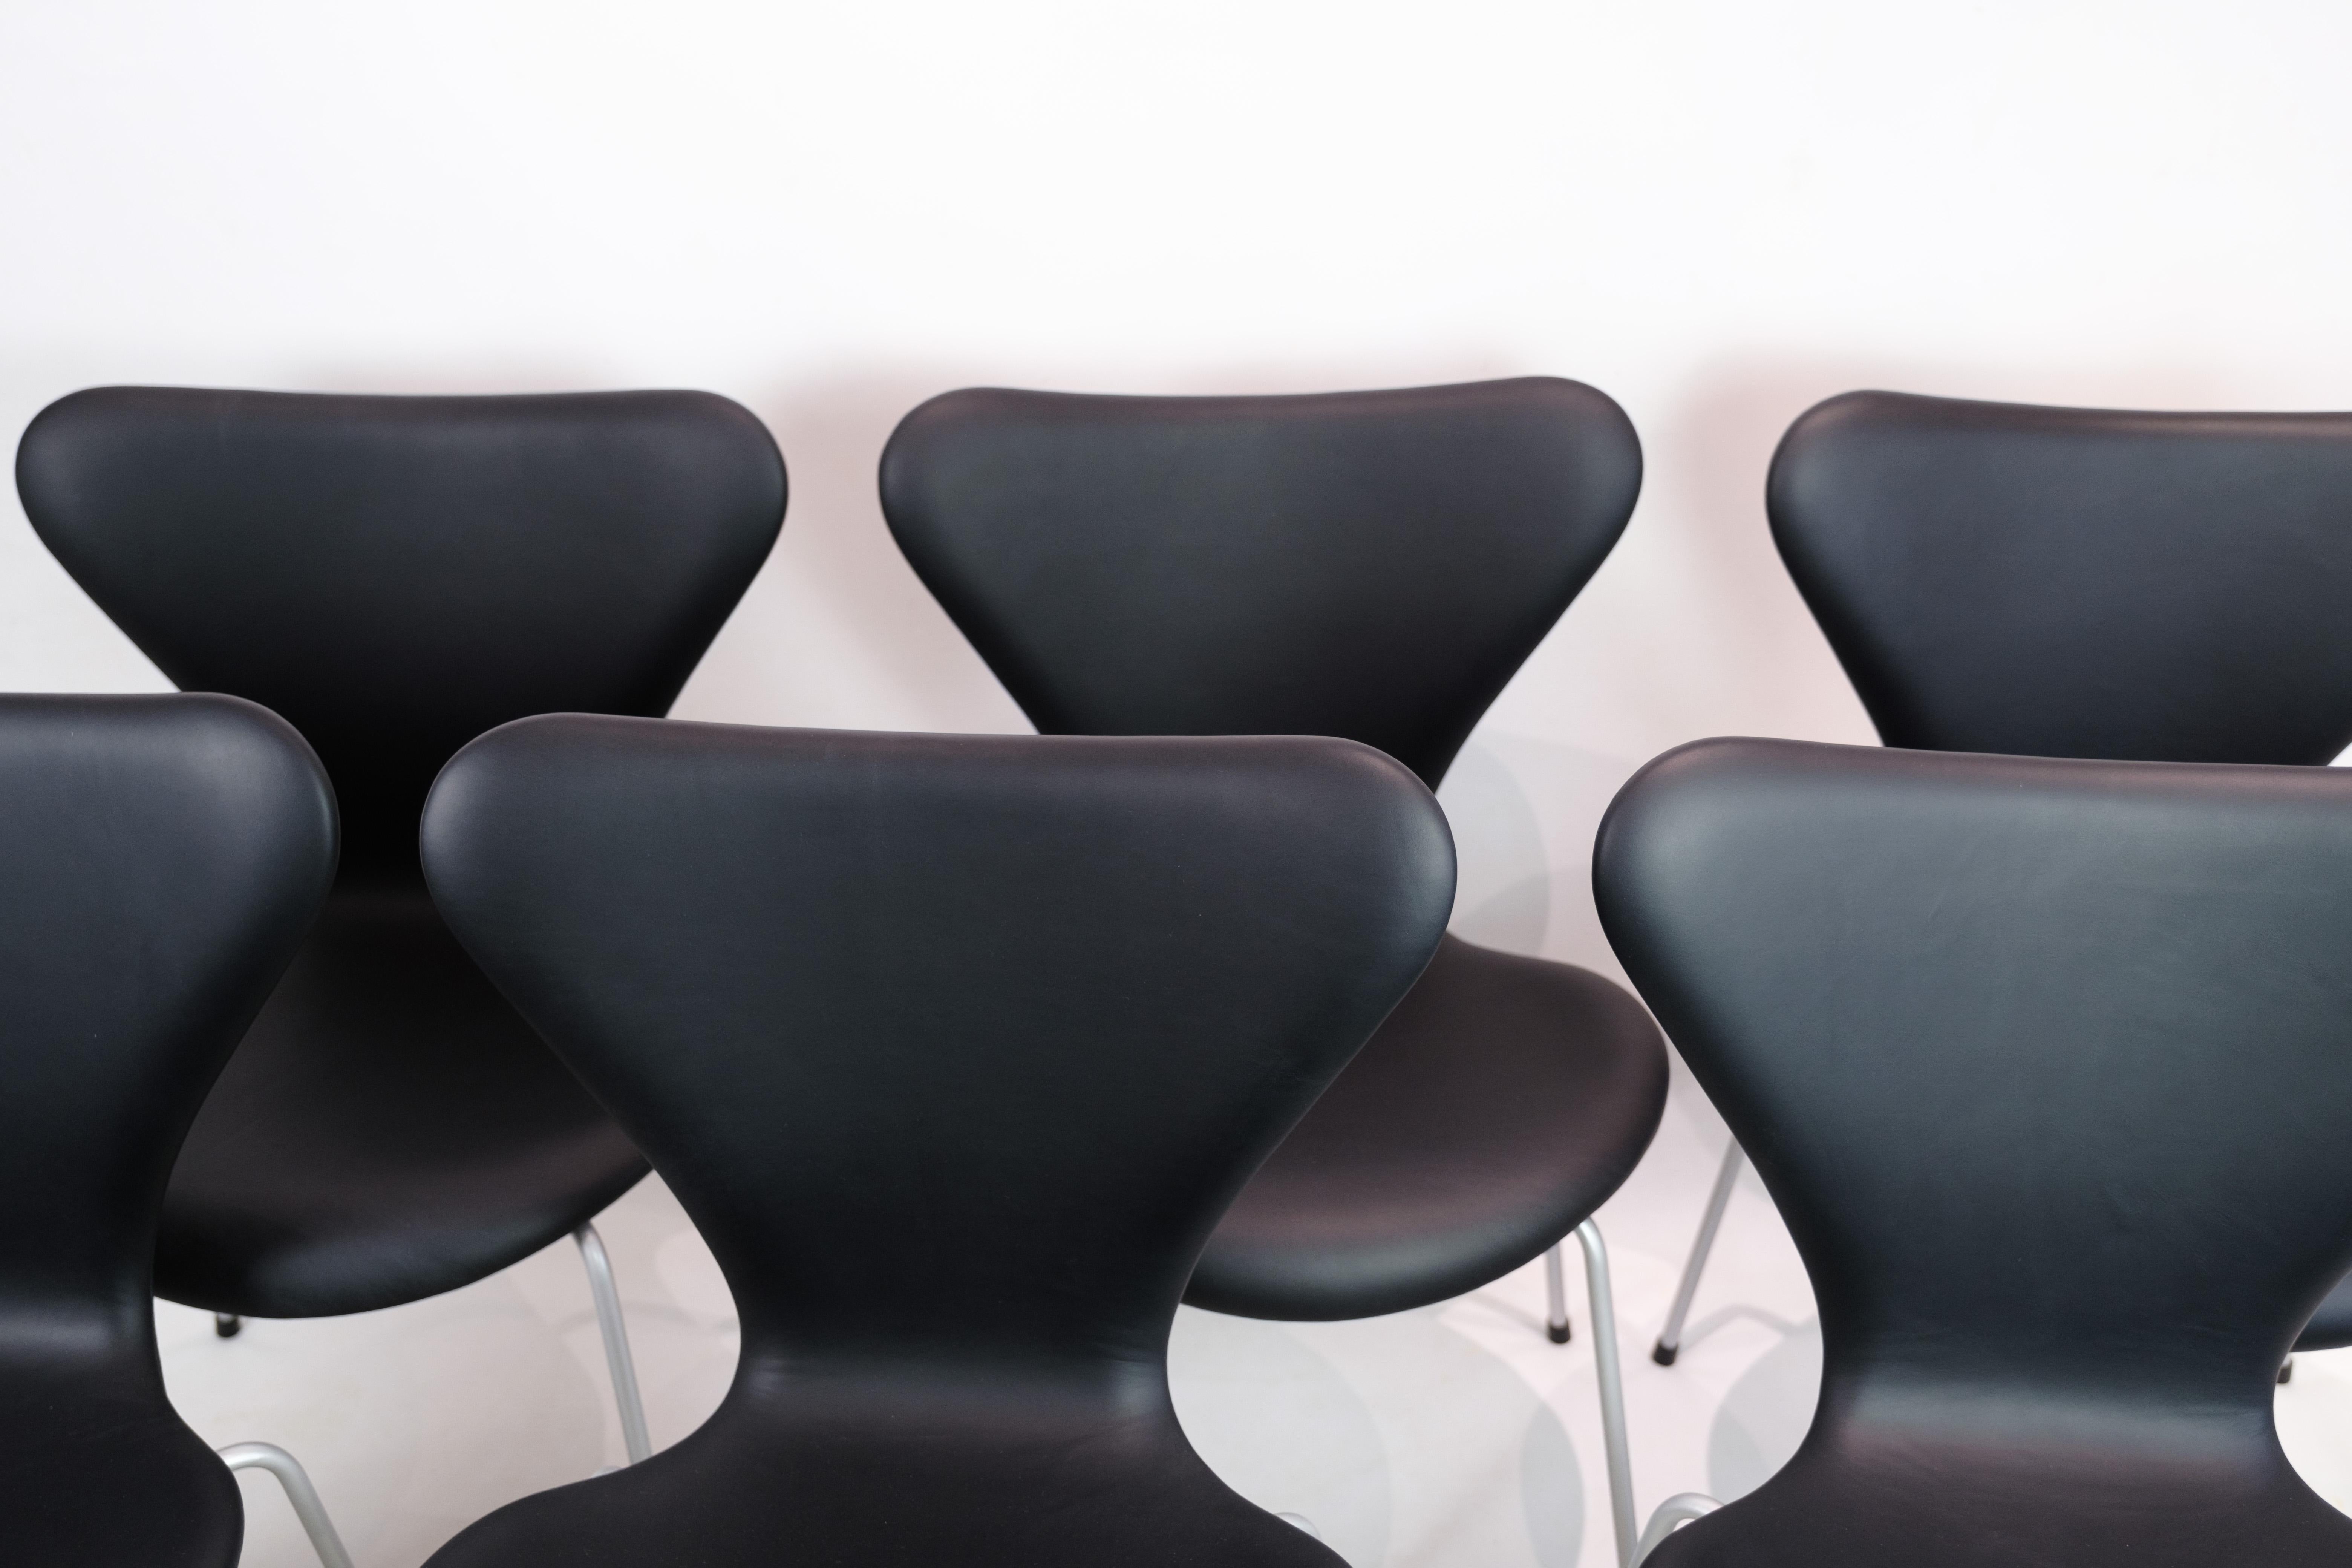 Exquisite Set of 6 Model 3107 Chairs by Arne Jacobsen, meticulously crafted in 1967 by Fritz Hansen, now beautifully reimagined with new upholstery in black elegance leather.

These iconic chairs, born from the visionary mind of Arne Jacobsen and